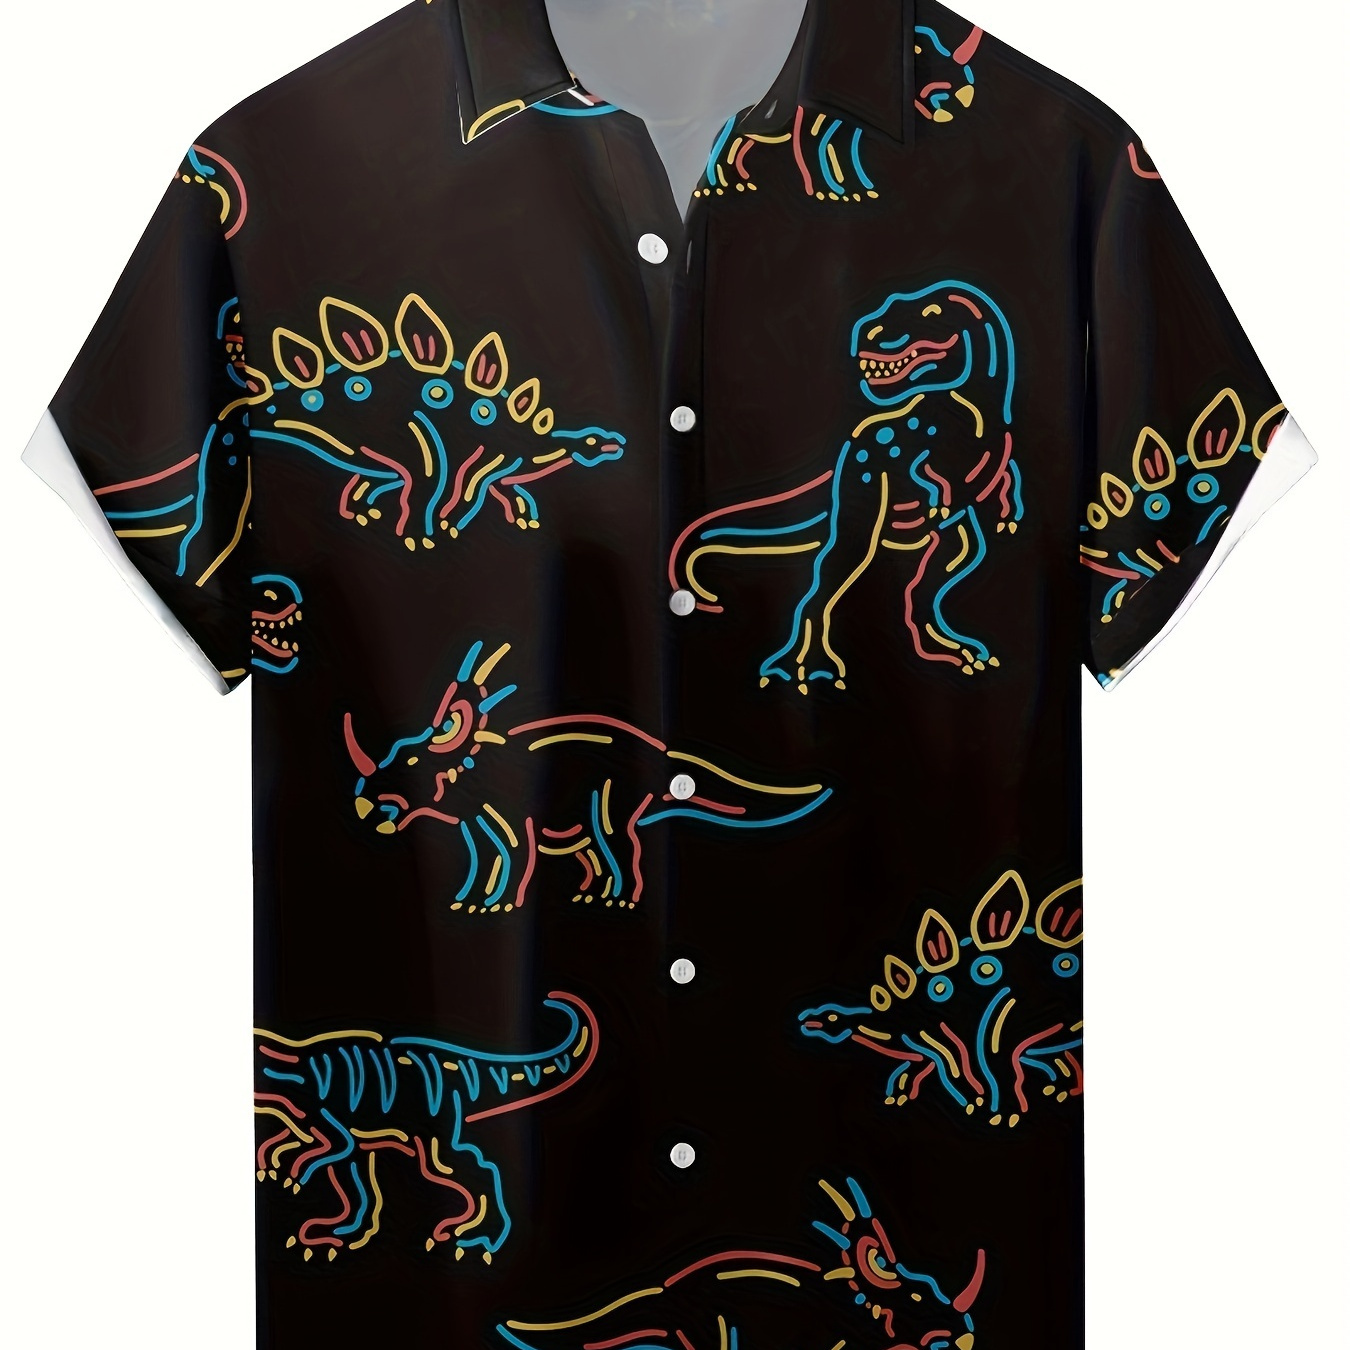 

Plus Size Dinosaur Graphic Design Men's Shirt Top, Short Sleeve Lapel Collar Shirts Male Casual Button Up Shirt For Daily Vacation Resorts Beach